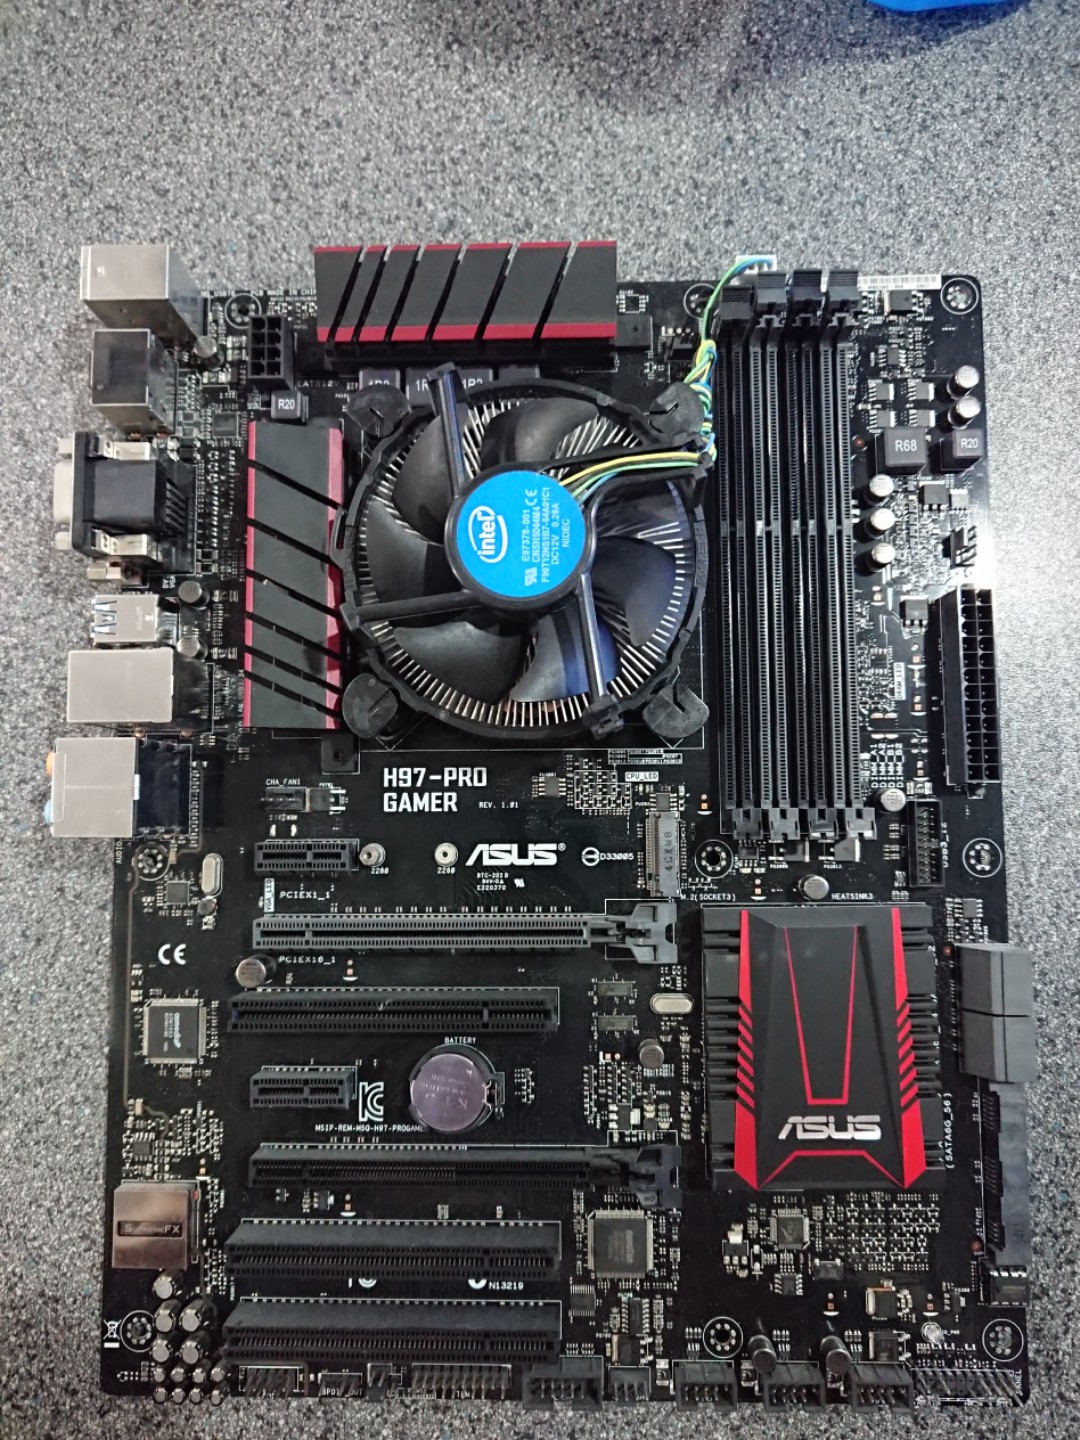 Asus Motherboard Intel I7 4790k 4 0ghz Processor Electronics Computer Parts Accessories On Carousell